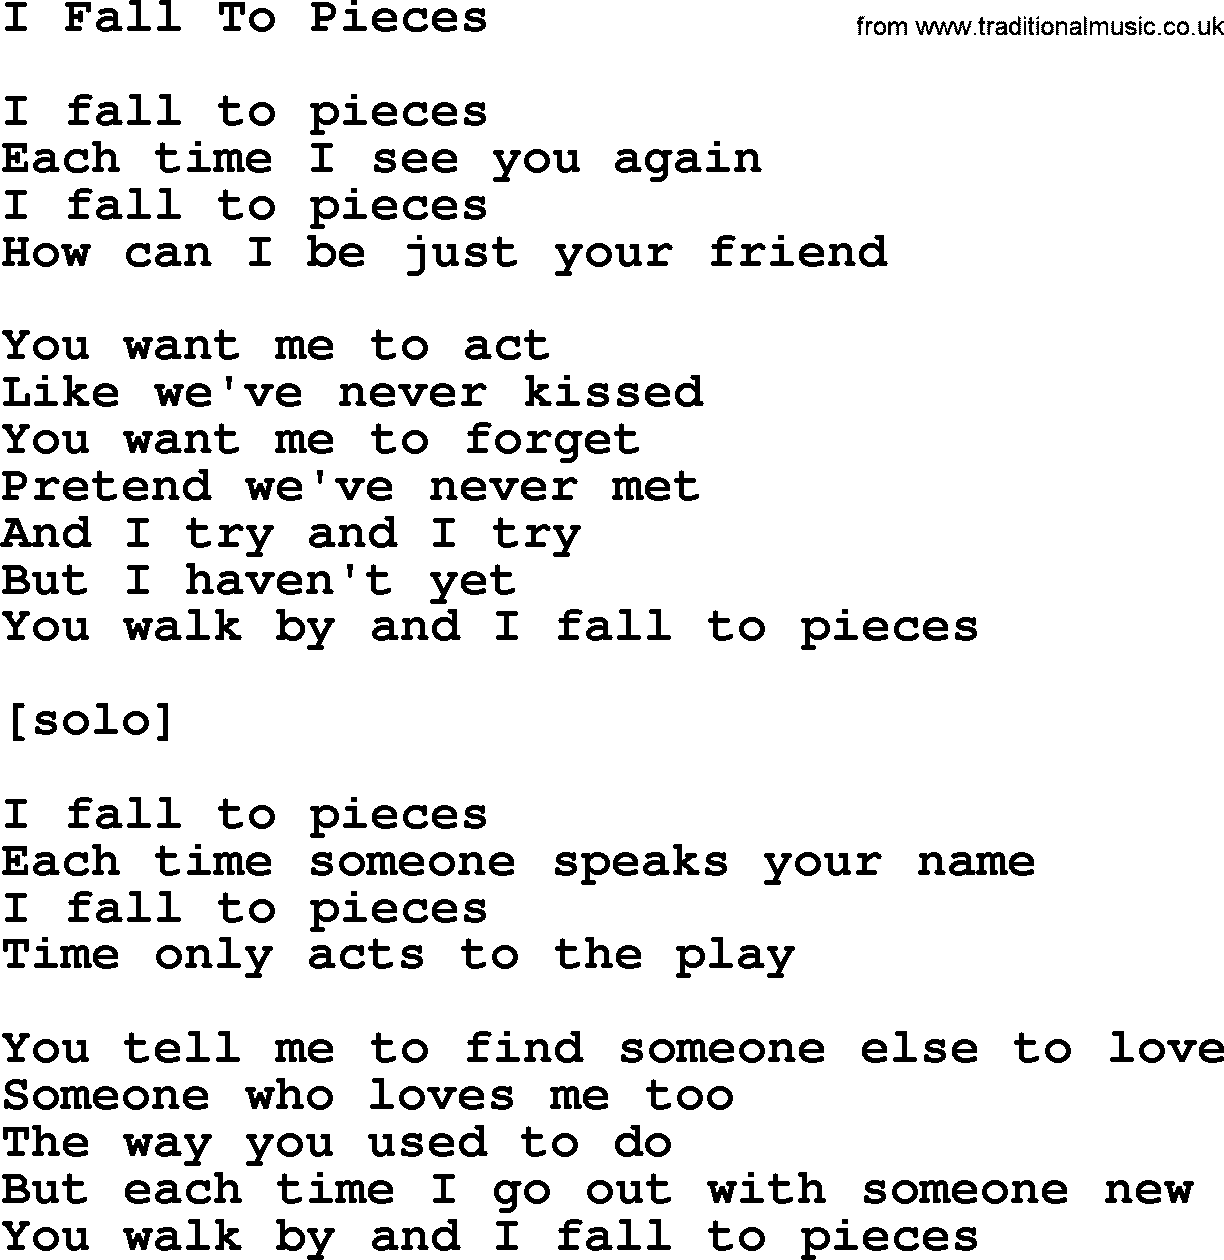 Willie Nelson song: I Fall To Pieces lyrics